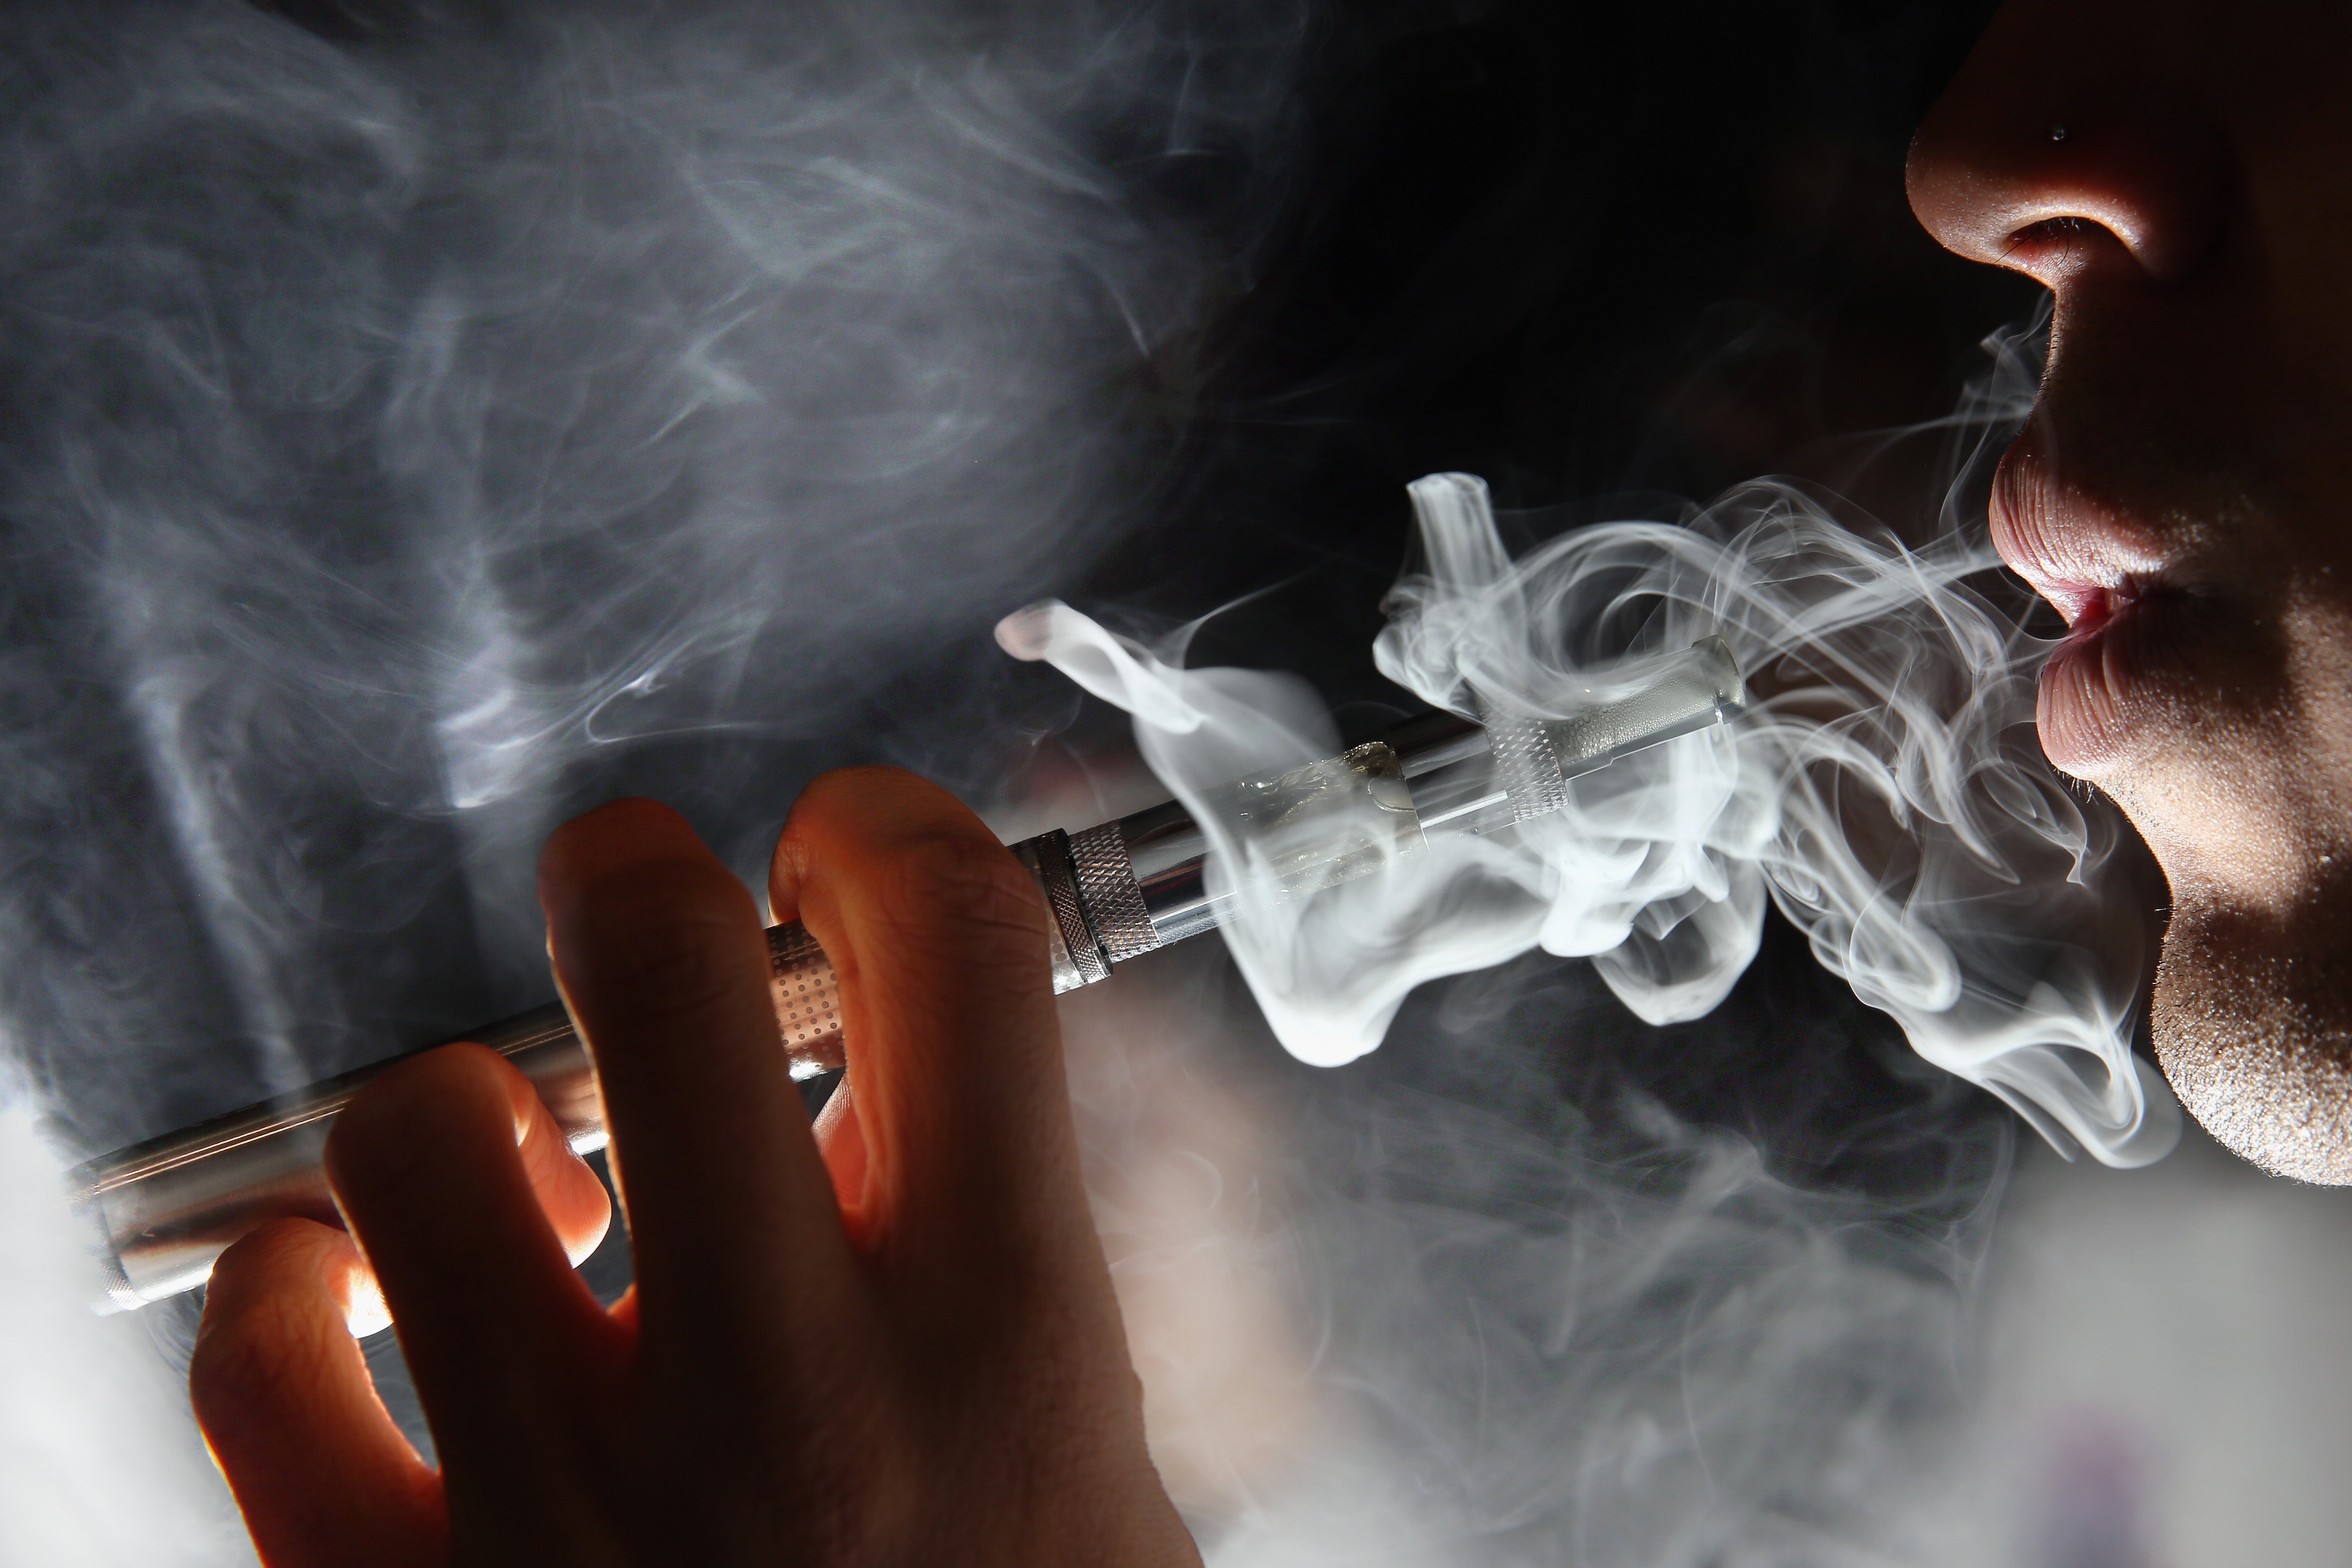 The WHO is calling for children and teenagers to be better protected from the temptations of e-cigarettes